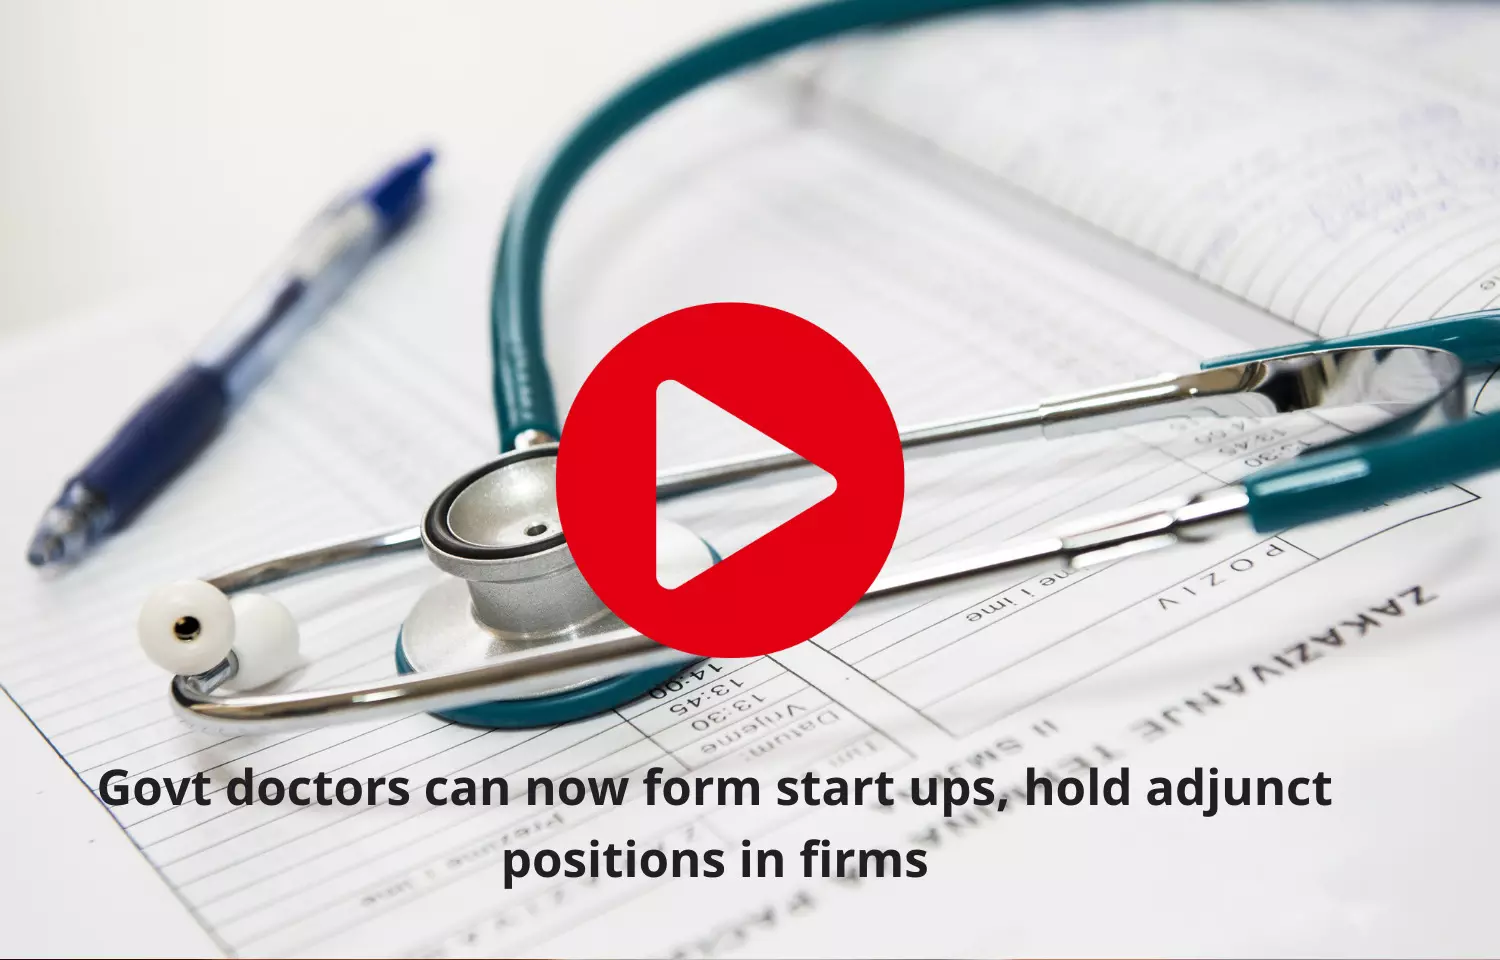 Govt doctors can now form start ups, hold adjunct positions in firms